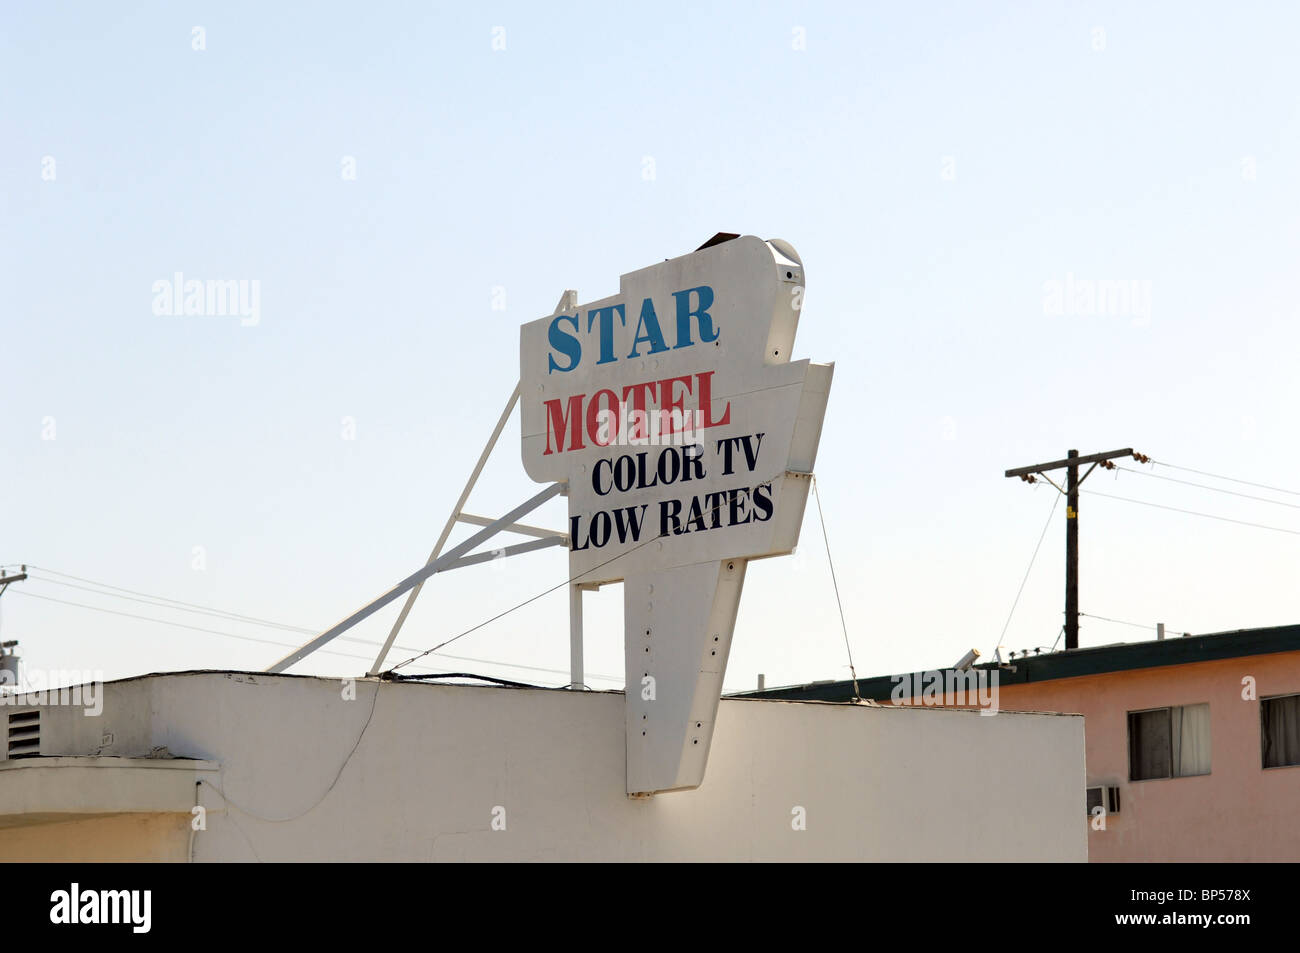 Discount Motel 'Star Motel' with color tv and low rates Stock Photo